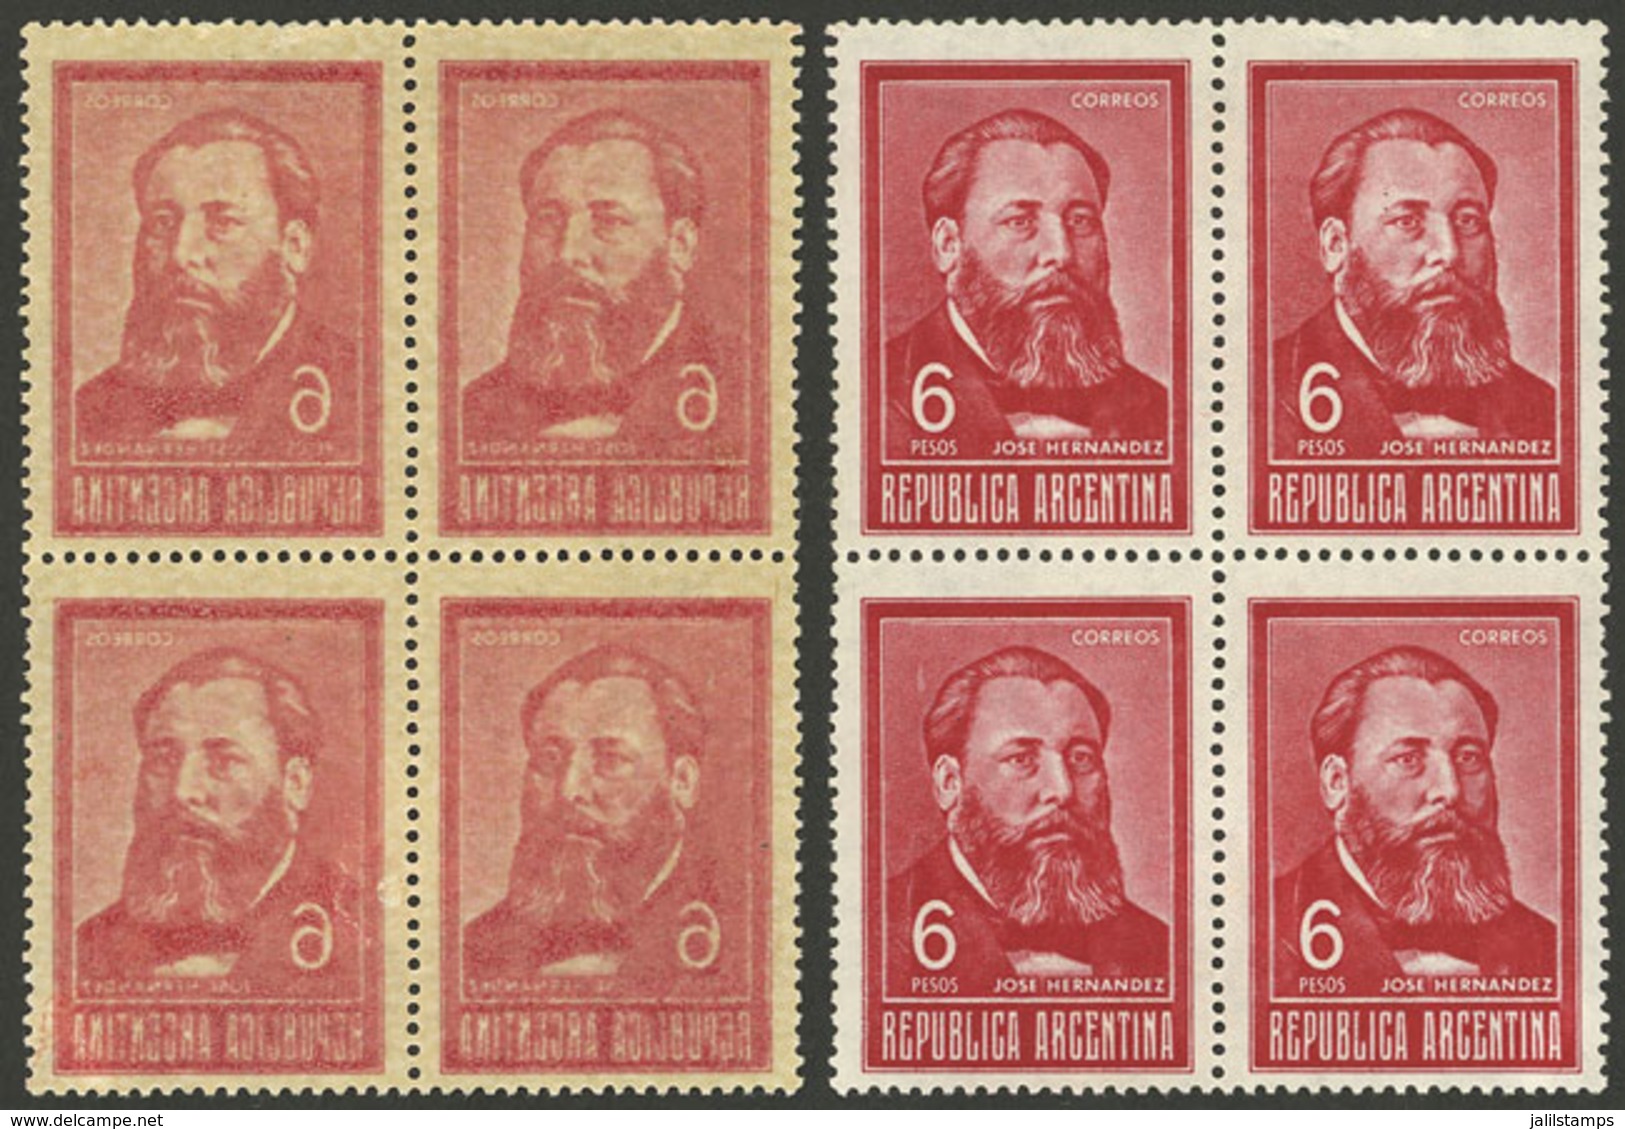 ARGENTINA: GJ.1304A, Block Of 4 With Intense Offset Impression On Back, Excellent Quality, Rare! - Unused Stamps